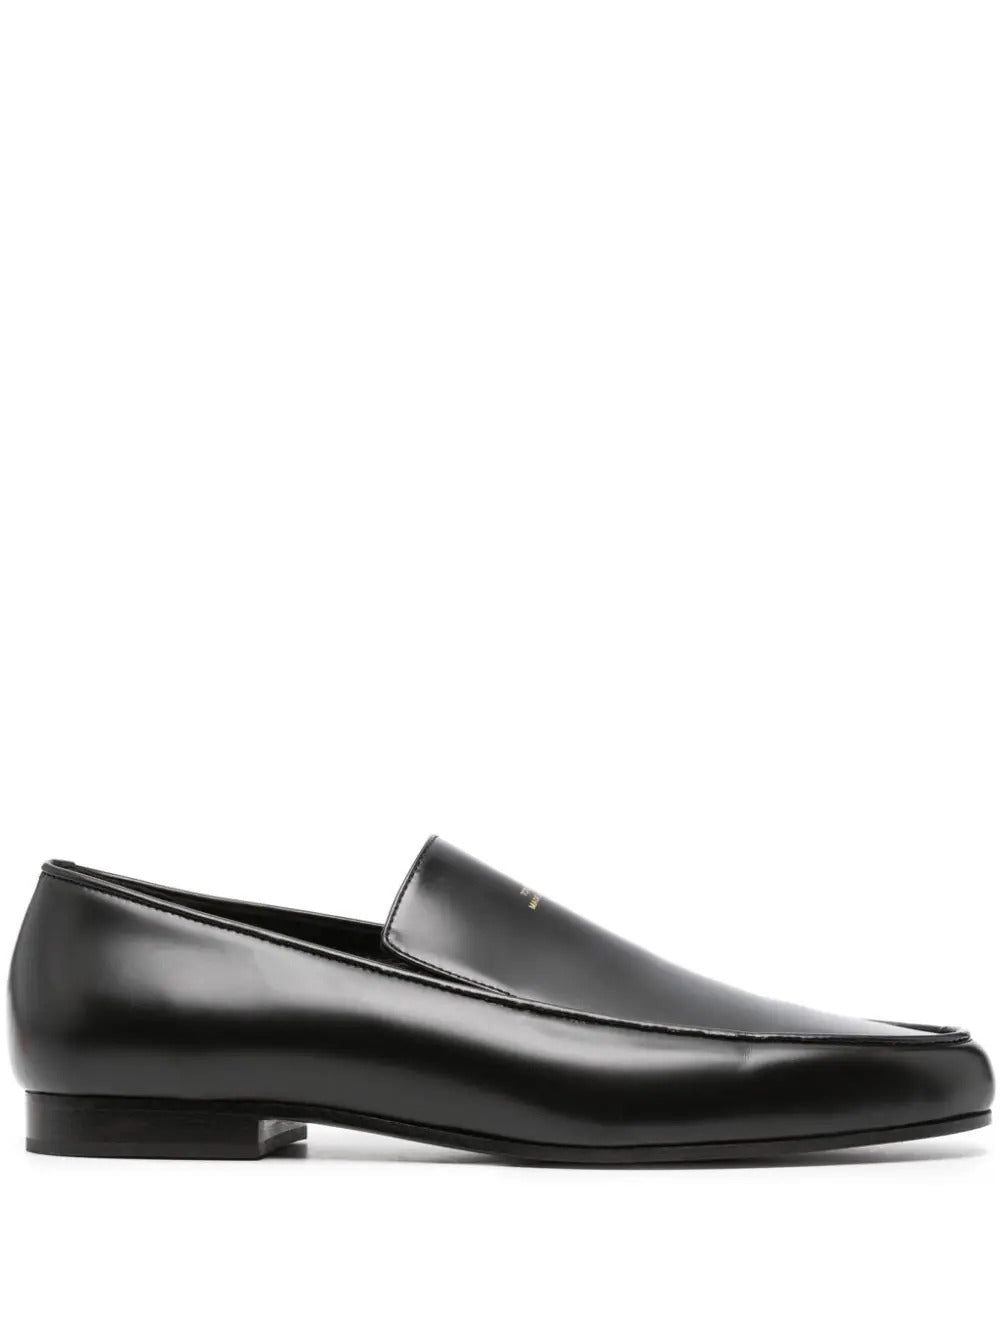 The Oval Loafer